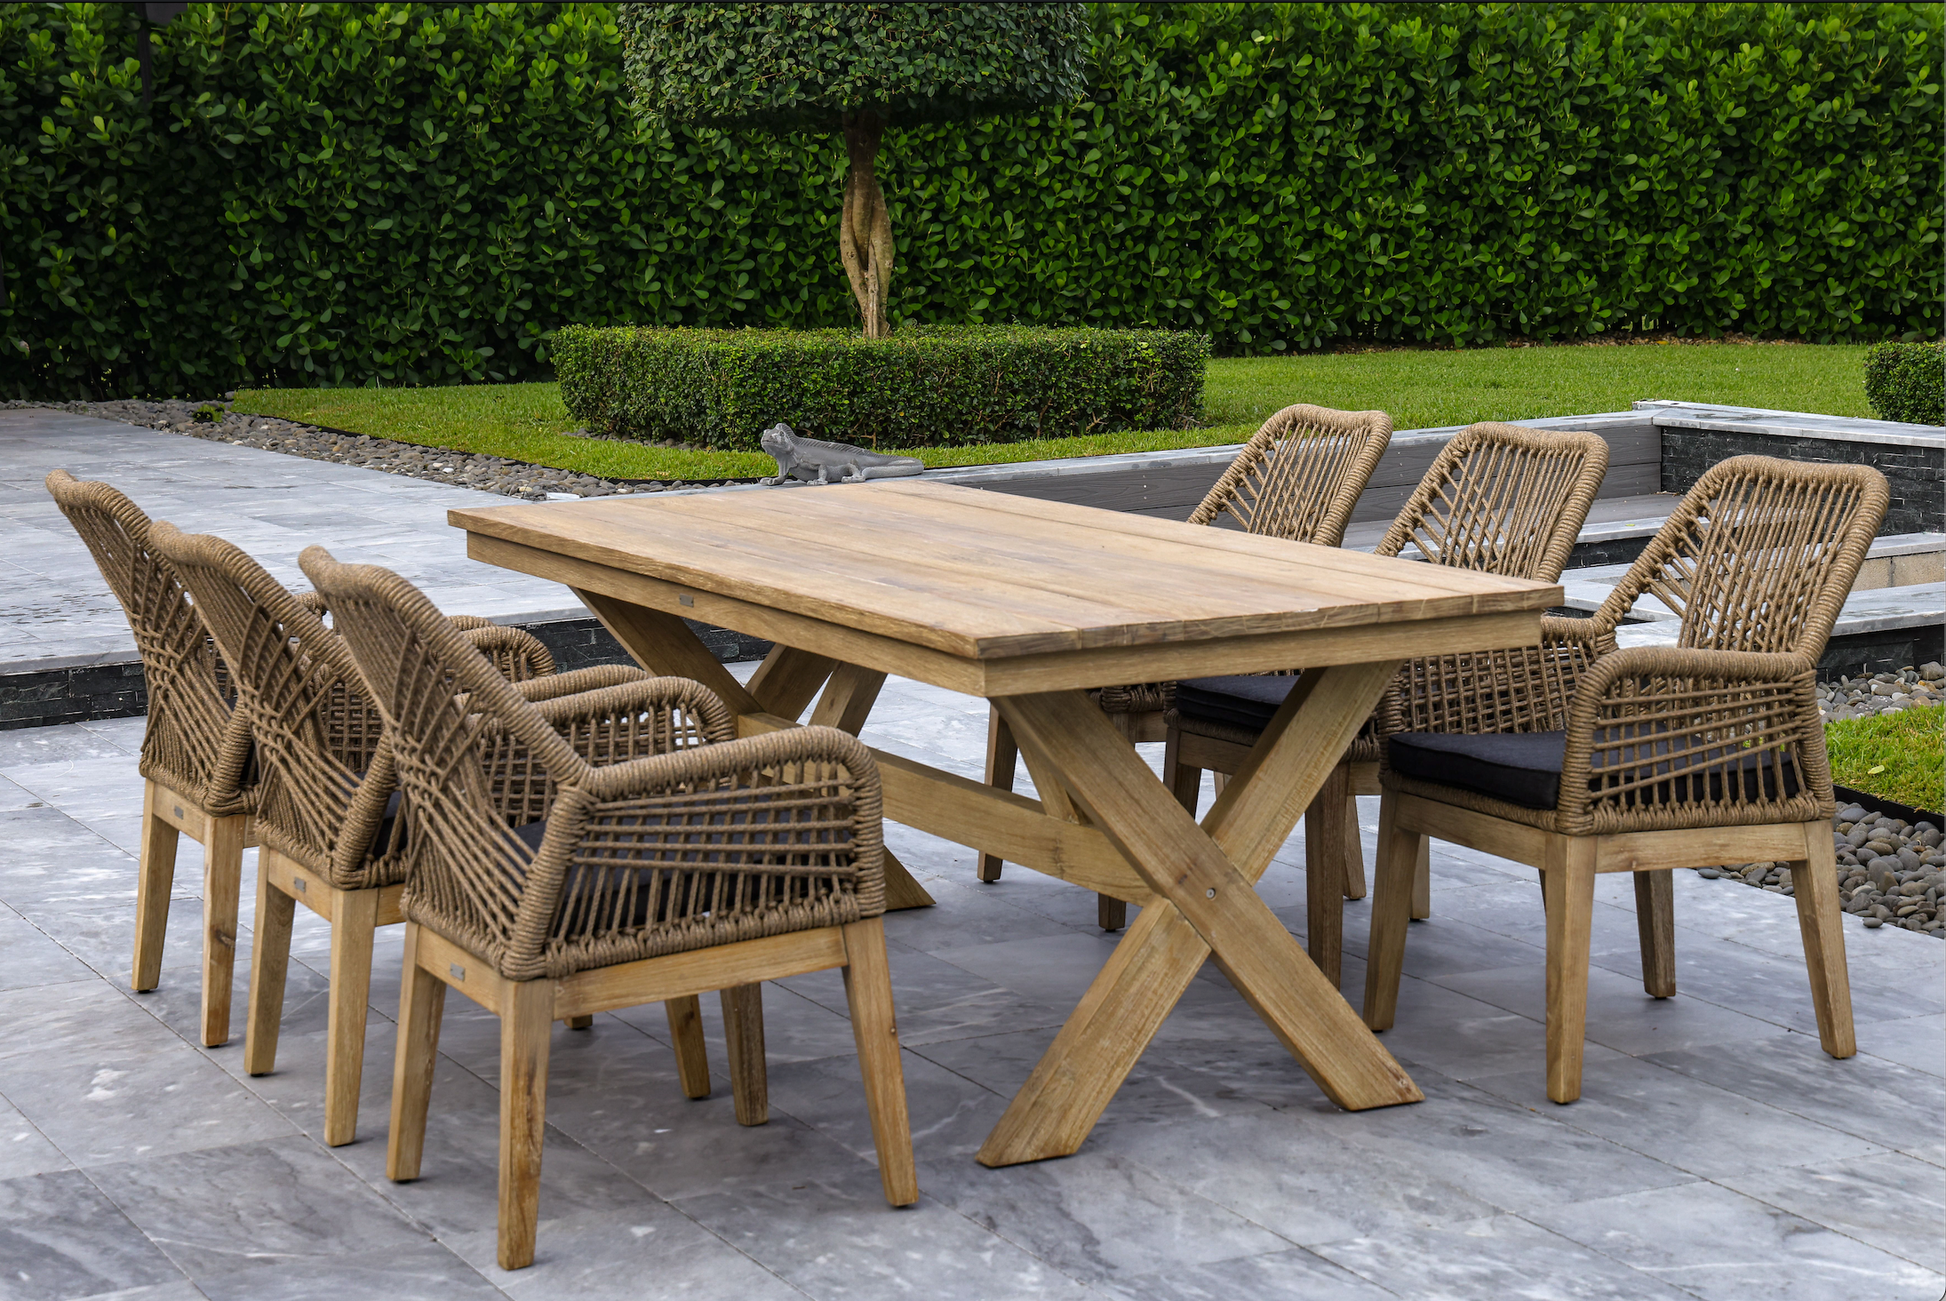 Santino 7-Piece Outdoor Dining Set - Wood Table with 6 Wood, Aluminum, and Rope Chairs 